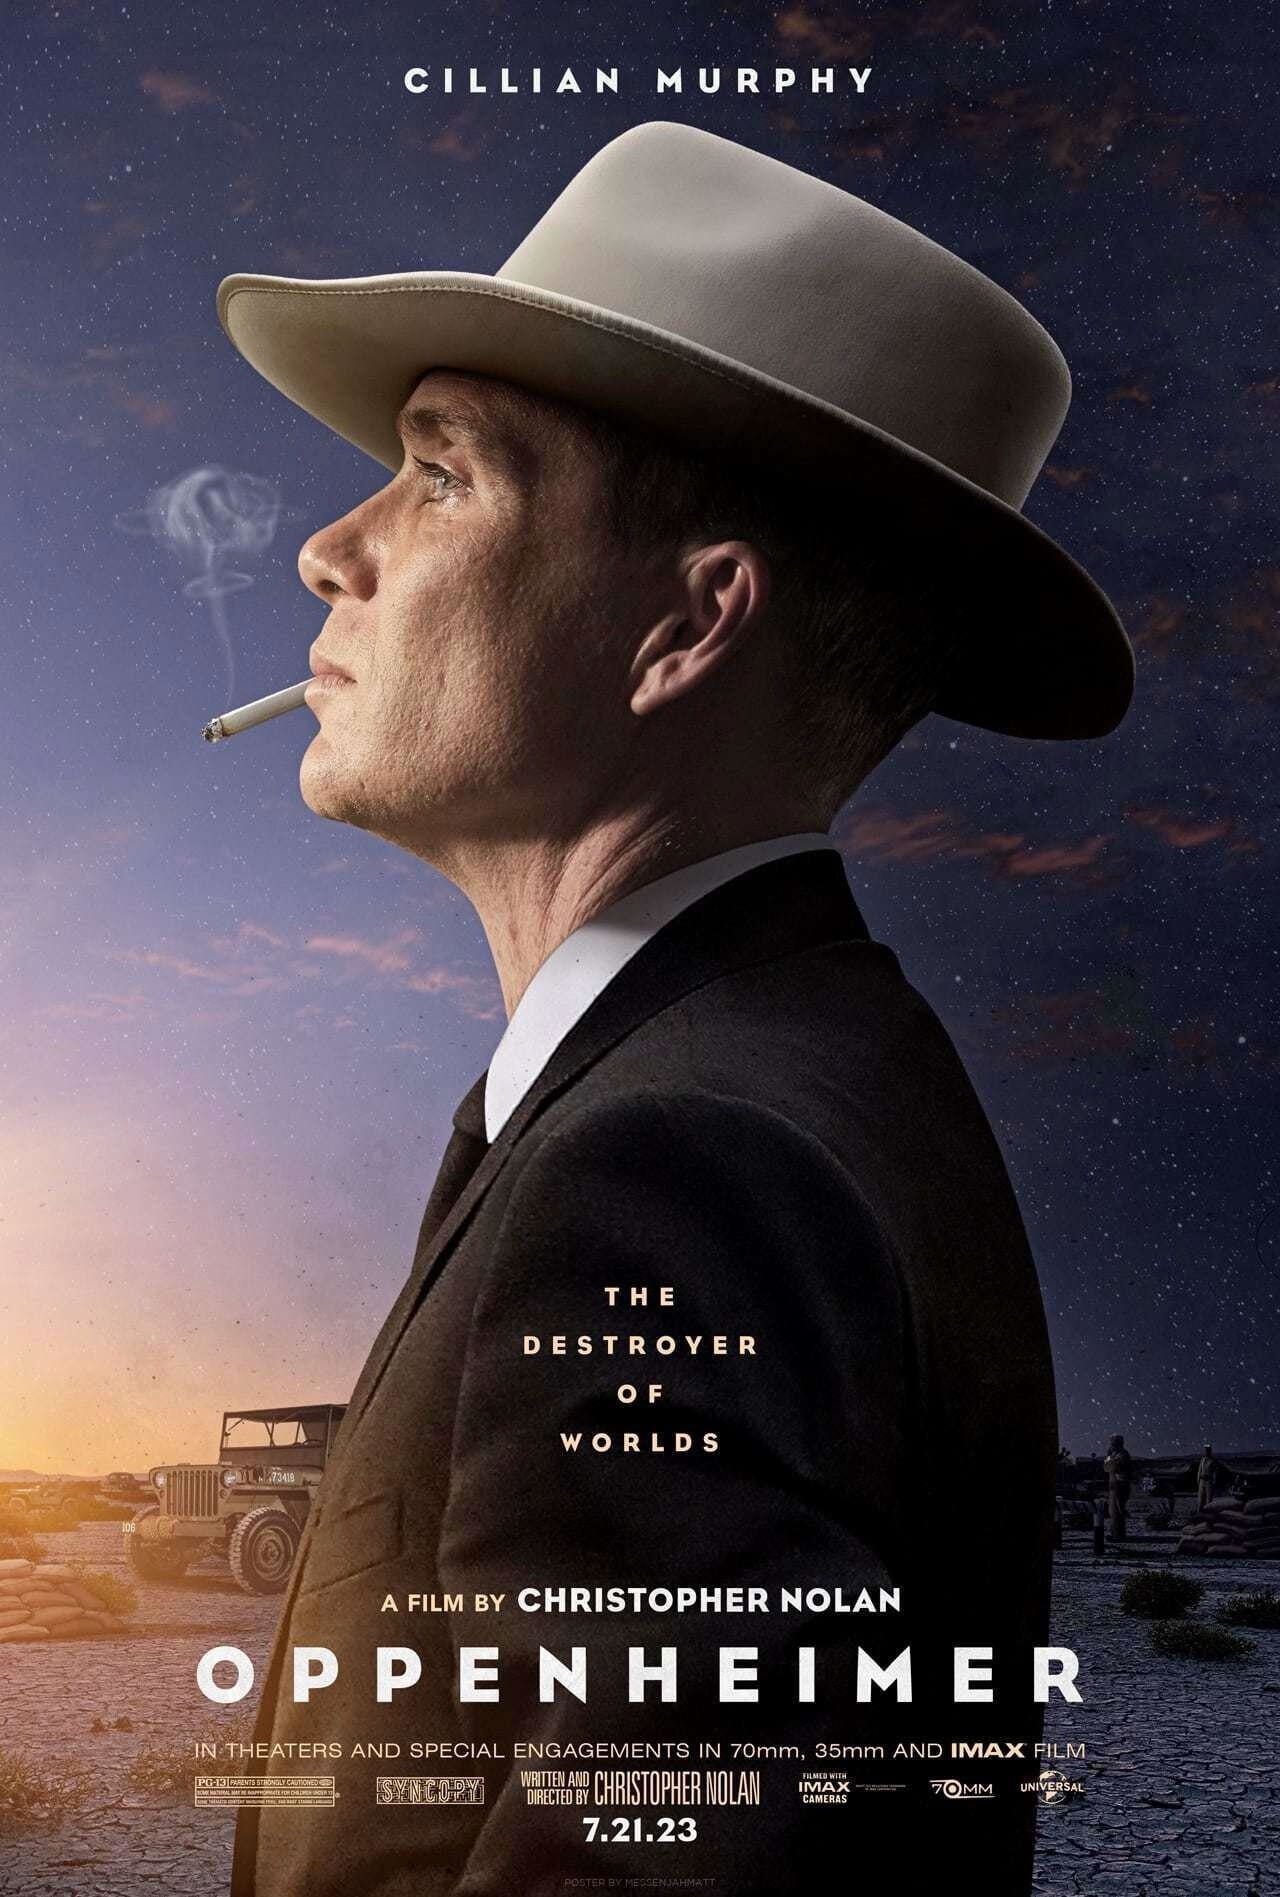 Cillian Murphy stands in profile on the Oppenheimer movie poster.